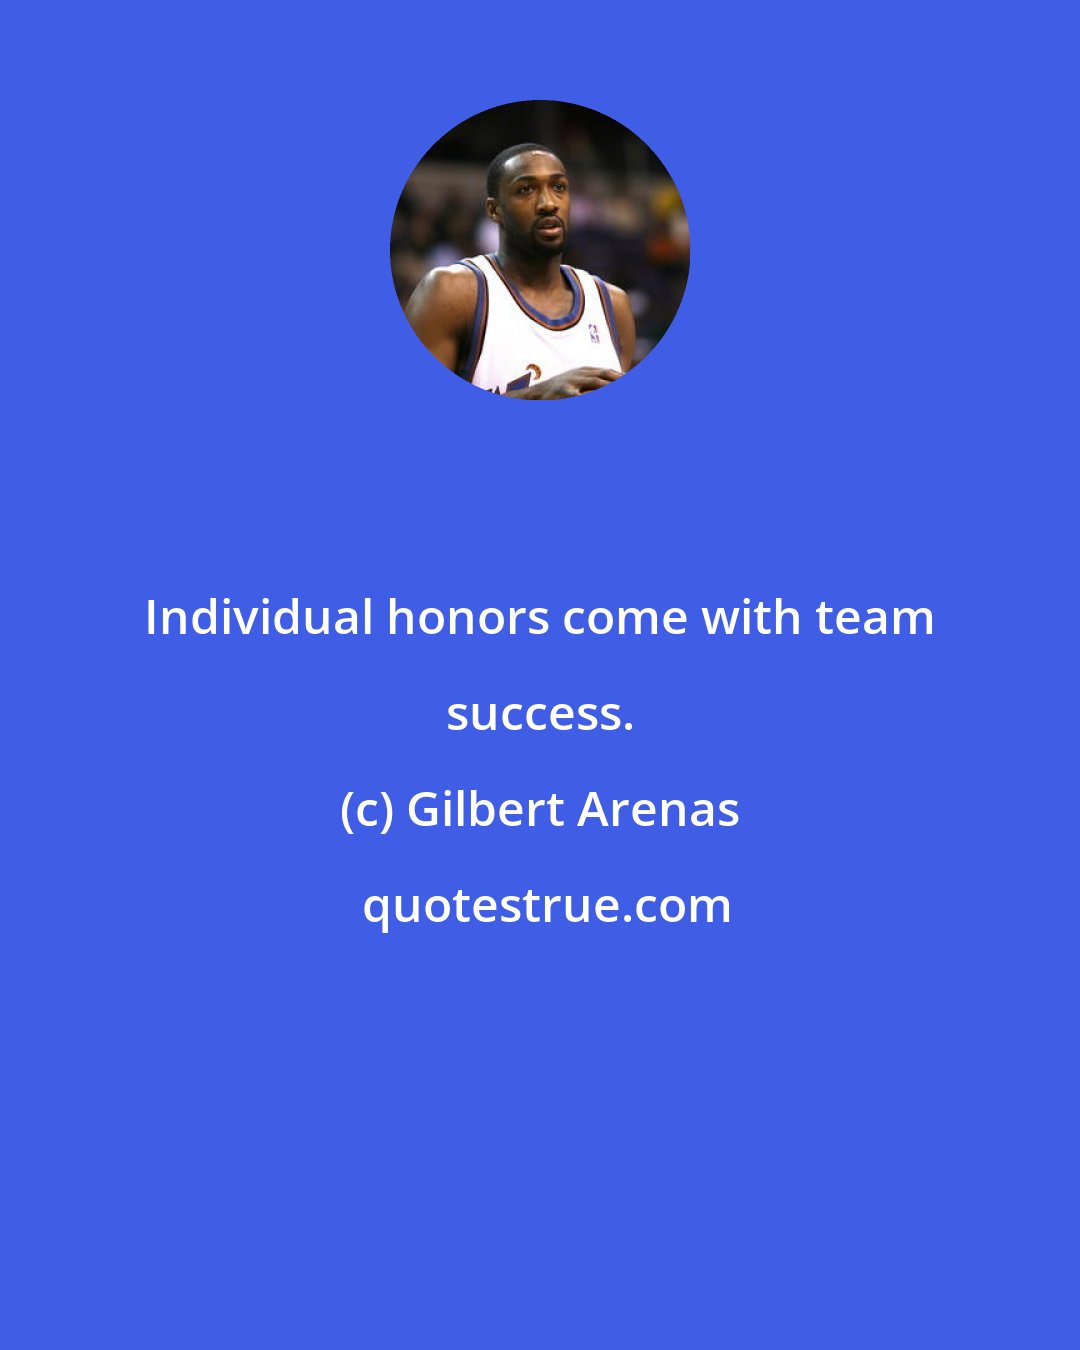 Gilbert Arenas: Individual honors come with team success.